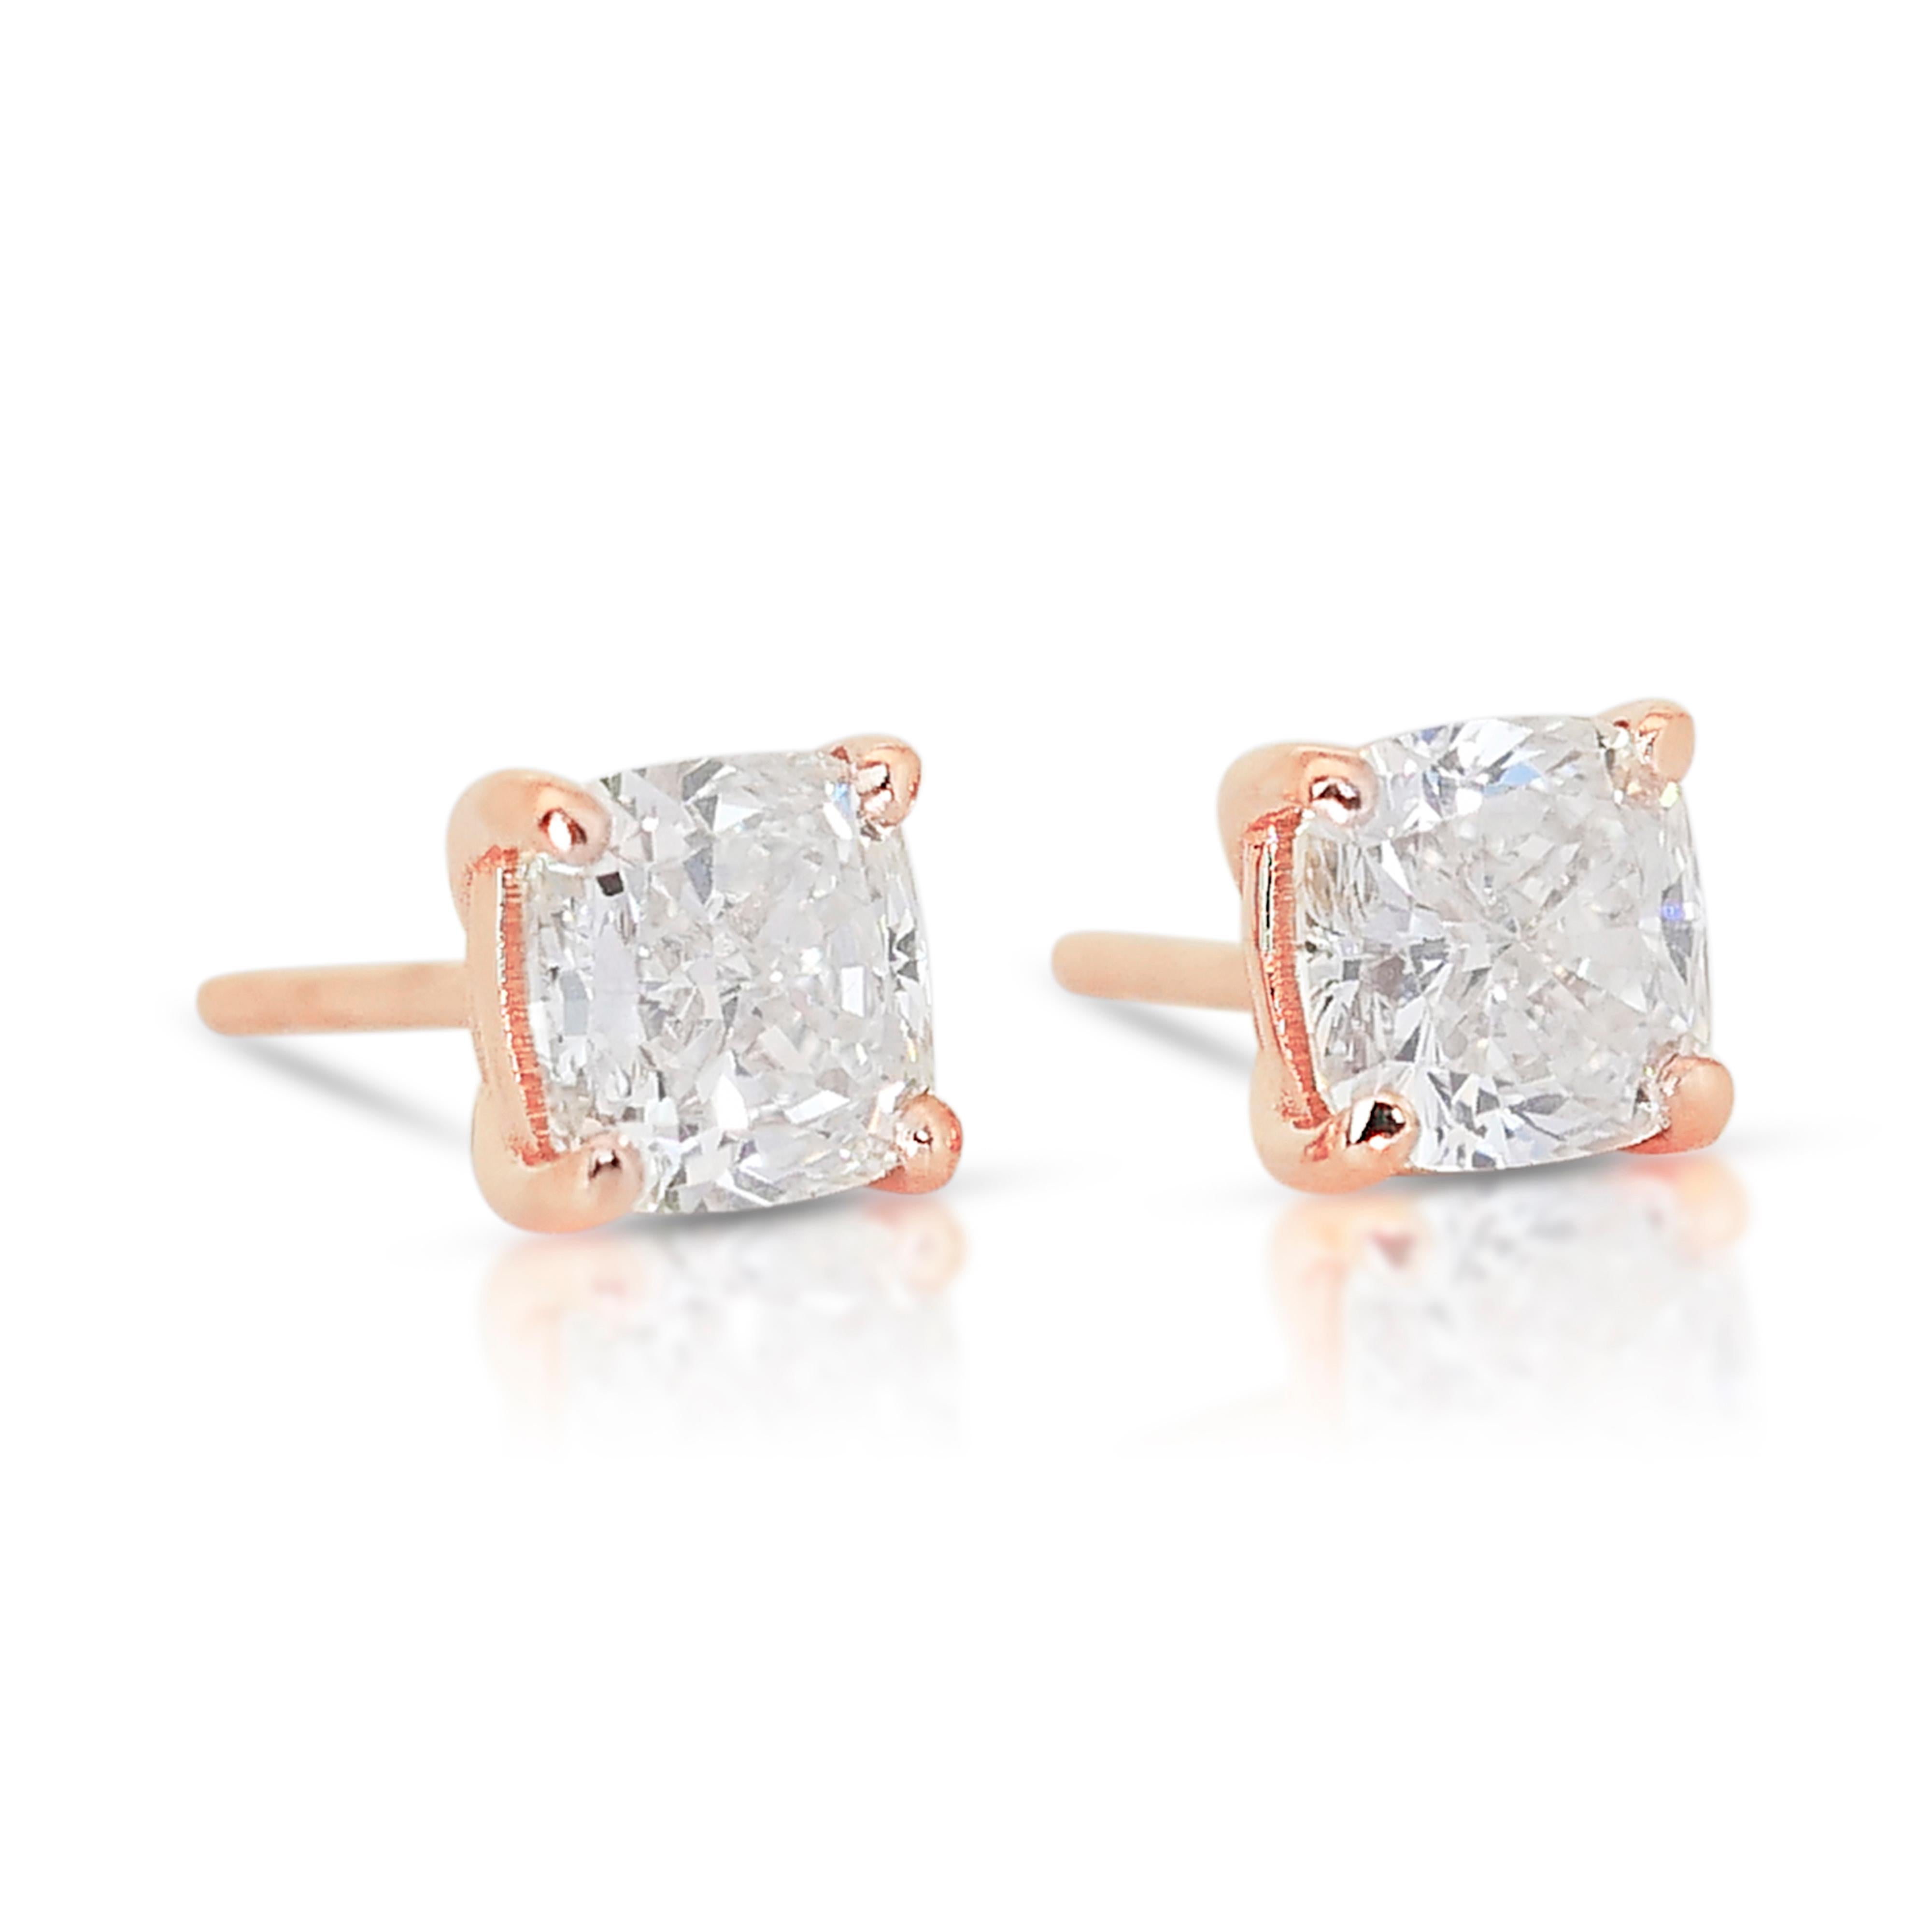 Round Cut Luxurious 1.68ct Diamond Stud Earrings in 14k Rose Gold - IGI Certified For Sale